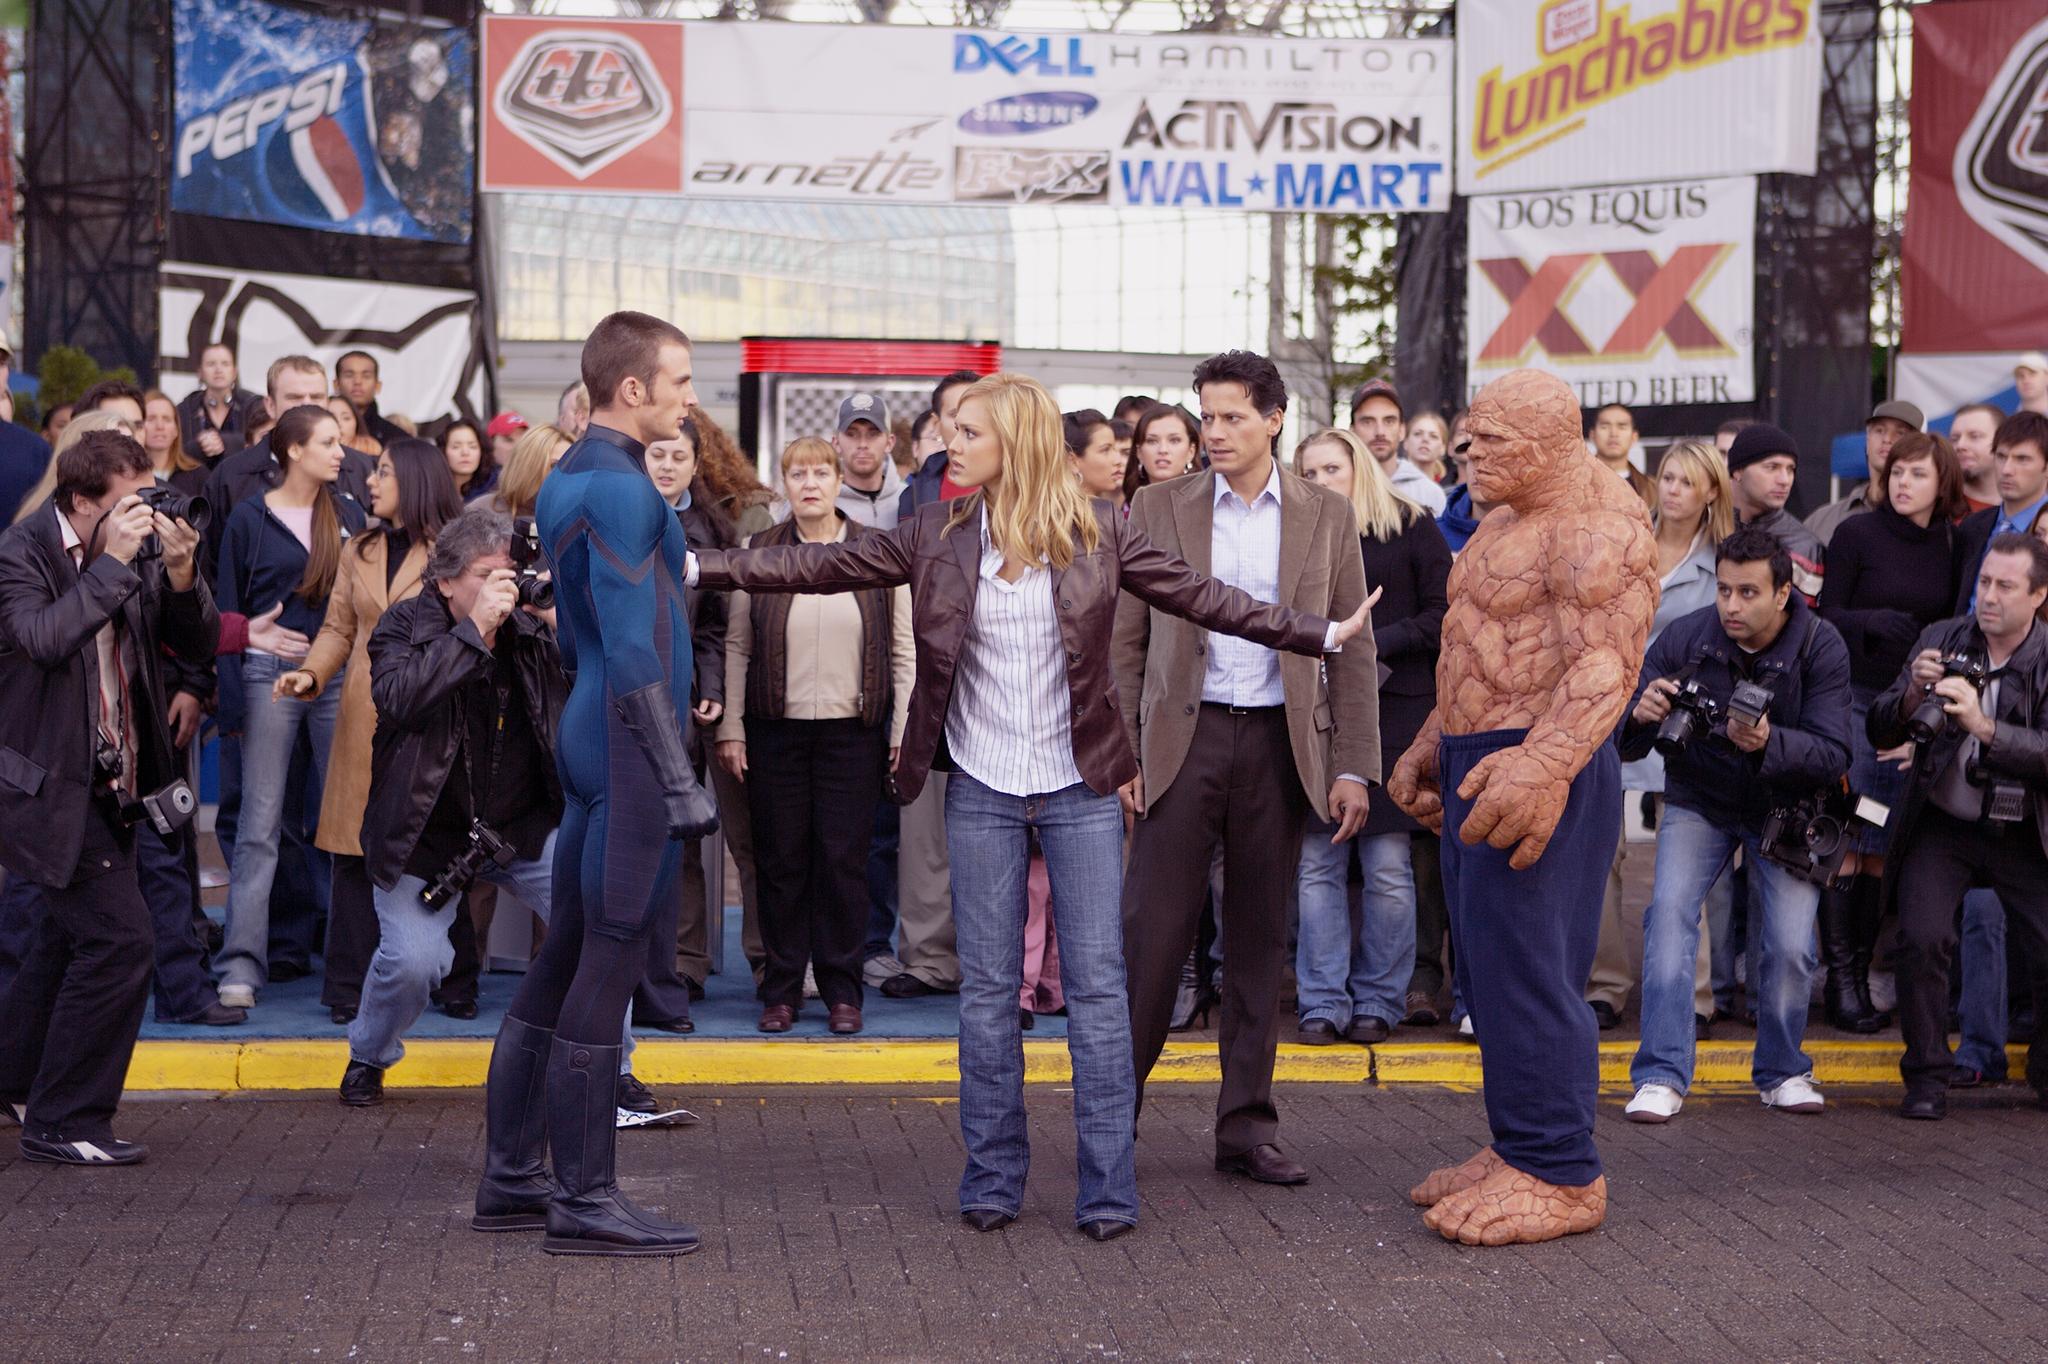 still-of-jessica-alba_-michael-chiklis_-chris-evans-and-ioan-gruffudd-in-fantastic-four-_2005_-large-picture.jpg